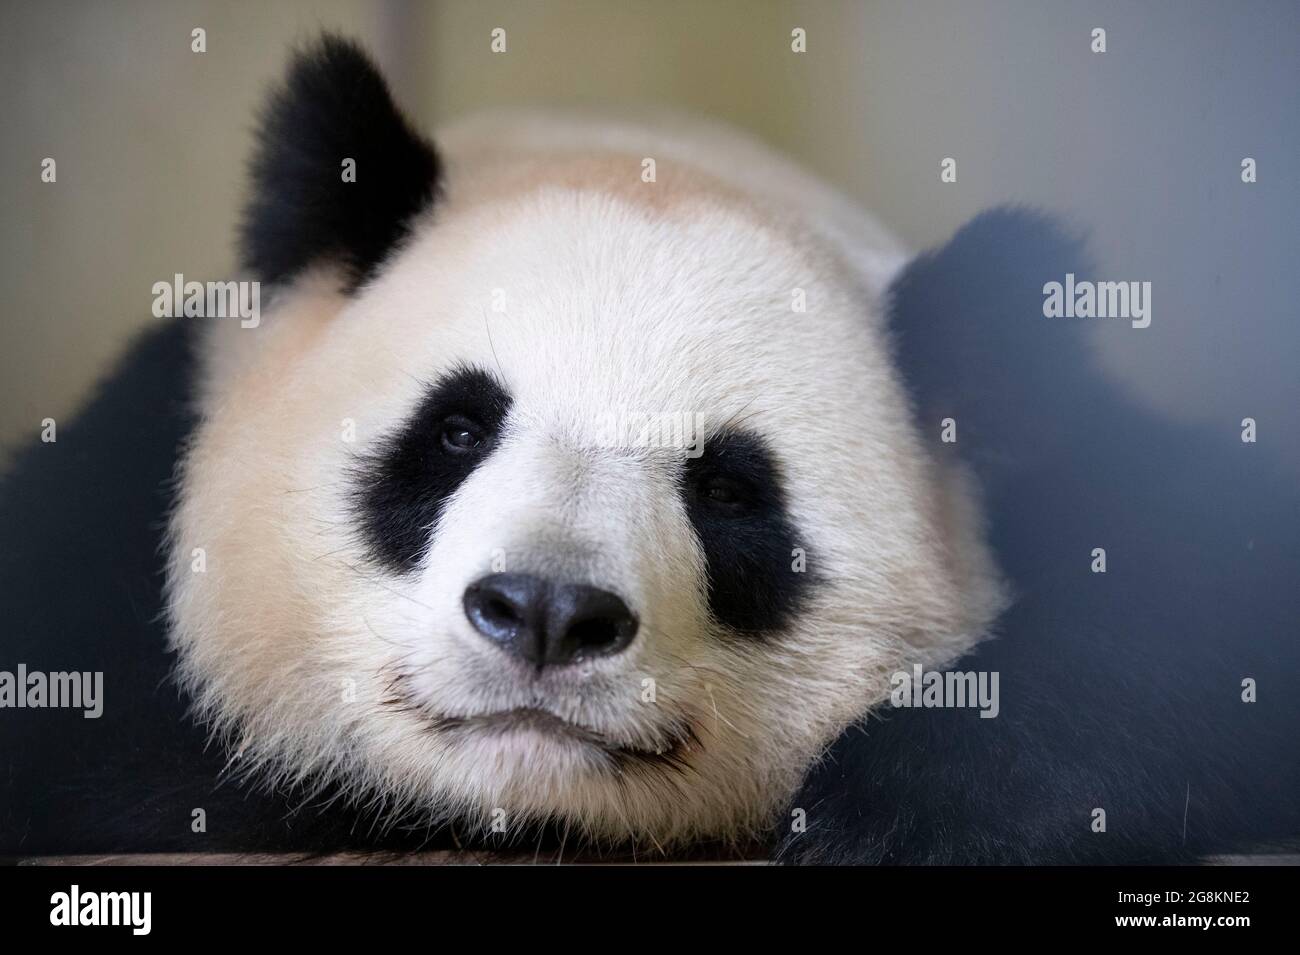 (210721) -- BEAUVAL, July 21, 2021 (Xinhua) -- File photo taken on May 5, 2021 shows giant panda Huan Huan at the Beauval Zoo in Saint-Aignan-sur-Cher, France. Huan Huan, a giant panda at Beauval Zoo in central France, is pregnant and the birth of her cub is expected in about 10 days, announced the zoo. Huan Huan, which means 'happy' in Chinese, and her male pal Yuan Zi, were both born in Chengdu, China, and arrived in France in 2012 when they were three years old. (Beauval Zoo/Handout via Xinhua) Stock Photo